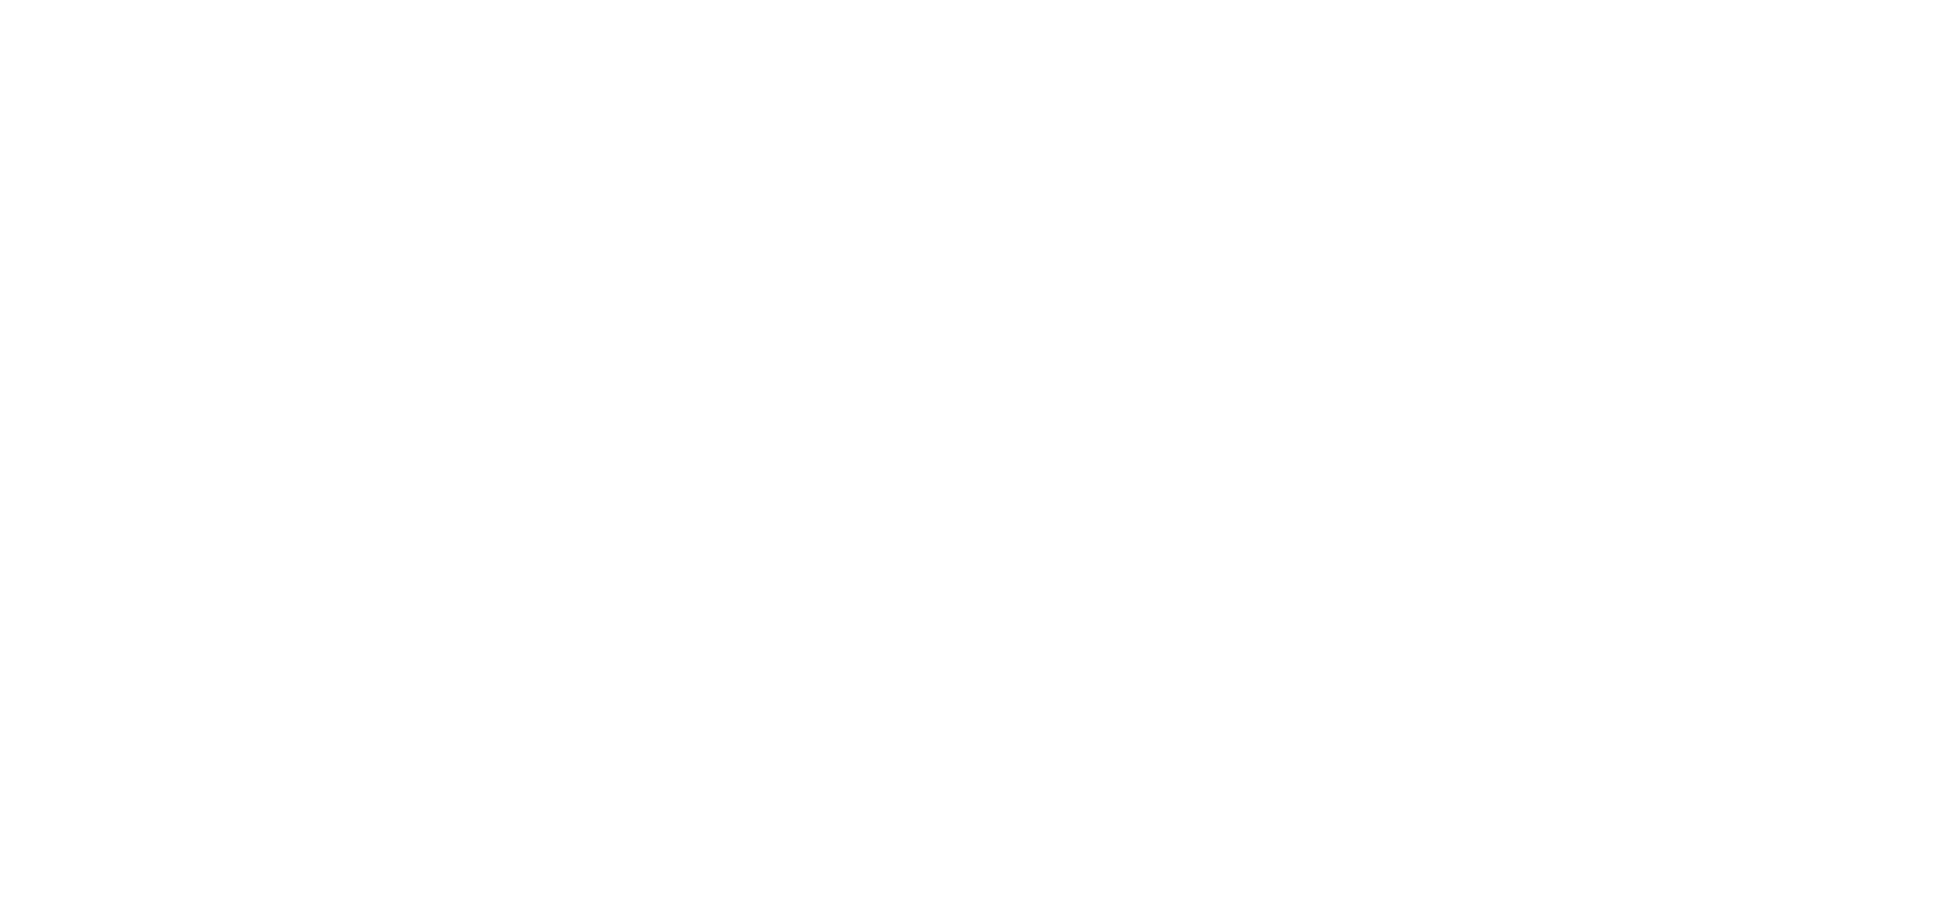 Healthcare-LifeScience_ICON-TYPE_Final-Black-BW-04 all white with rule.png